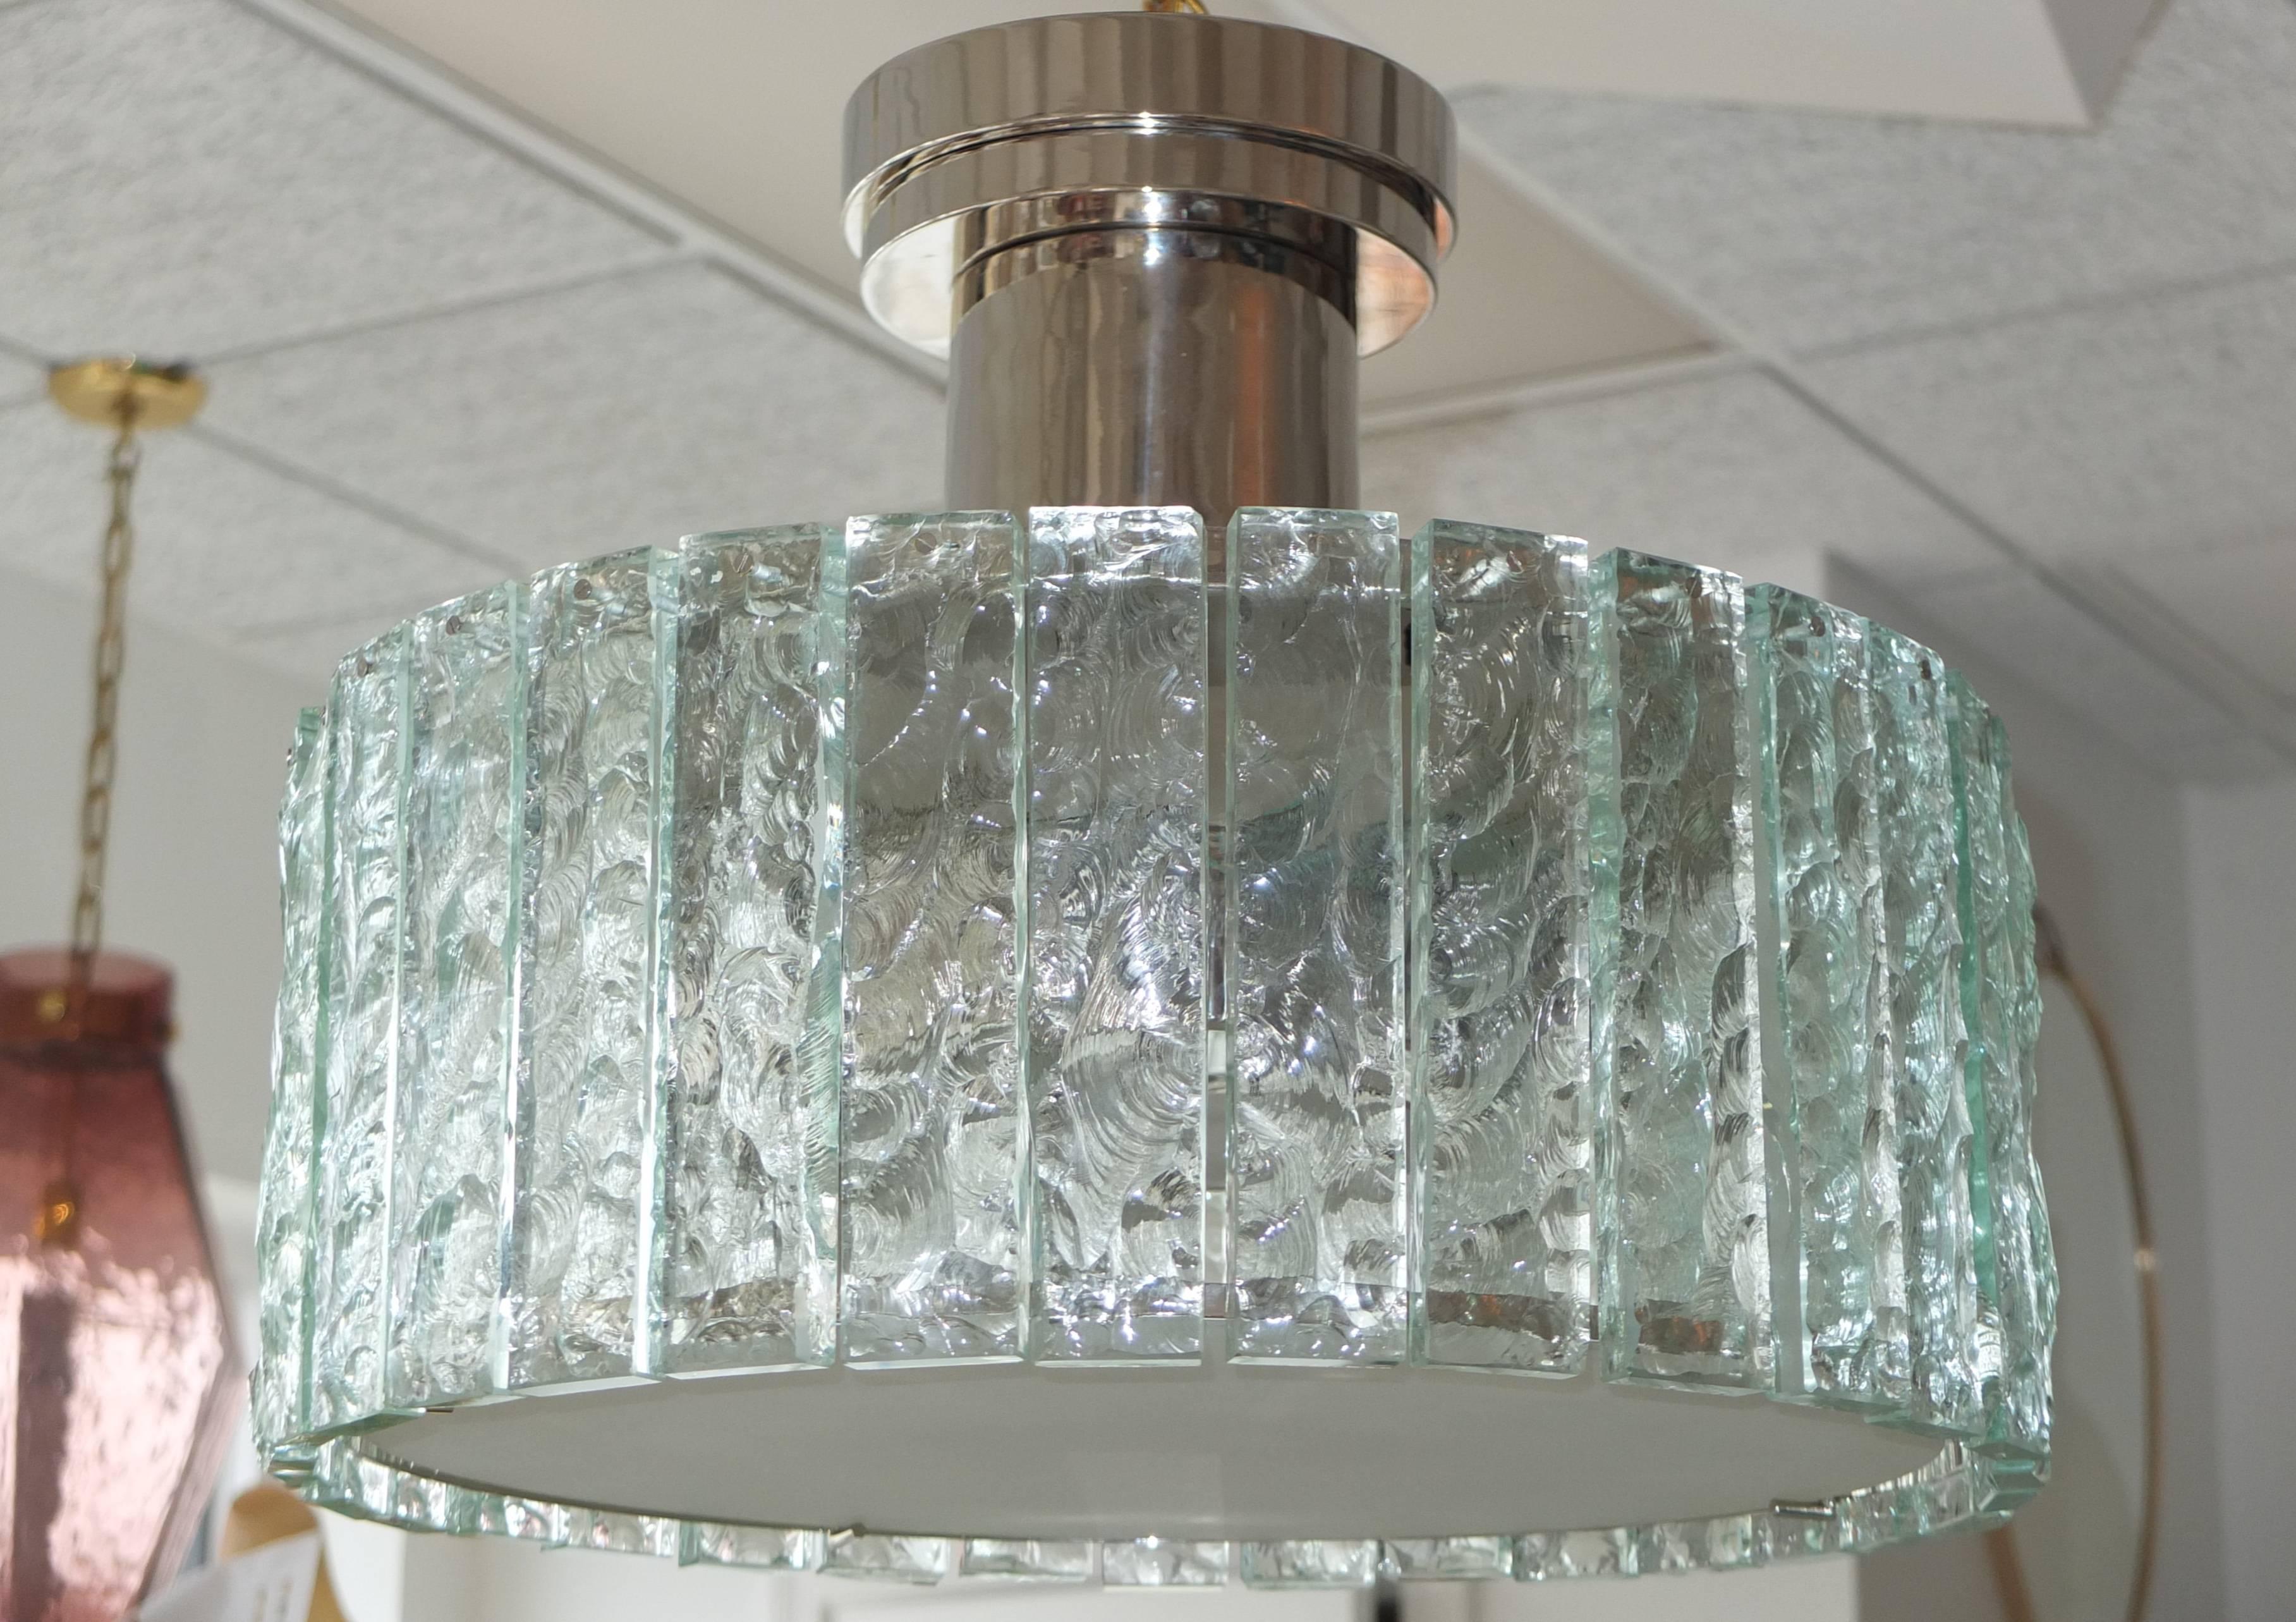 
Max Ingrand (1906-1969), suspension lamp model 2448 nickel-plated brass with chiseled crystal diffusers and opal glass screen. Produced by Fontana Arte, Italy circa later half of the 1950's. Includes a custom 7 inch diameter ceiling canopy nickel